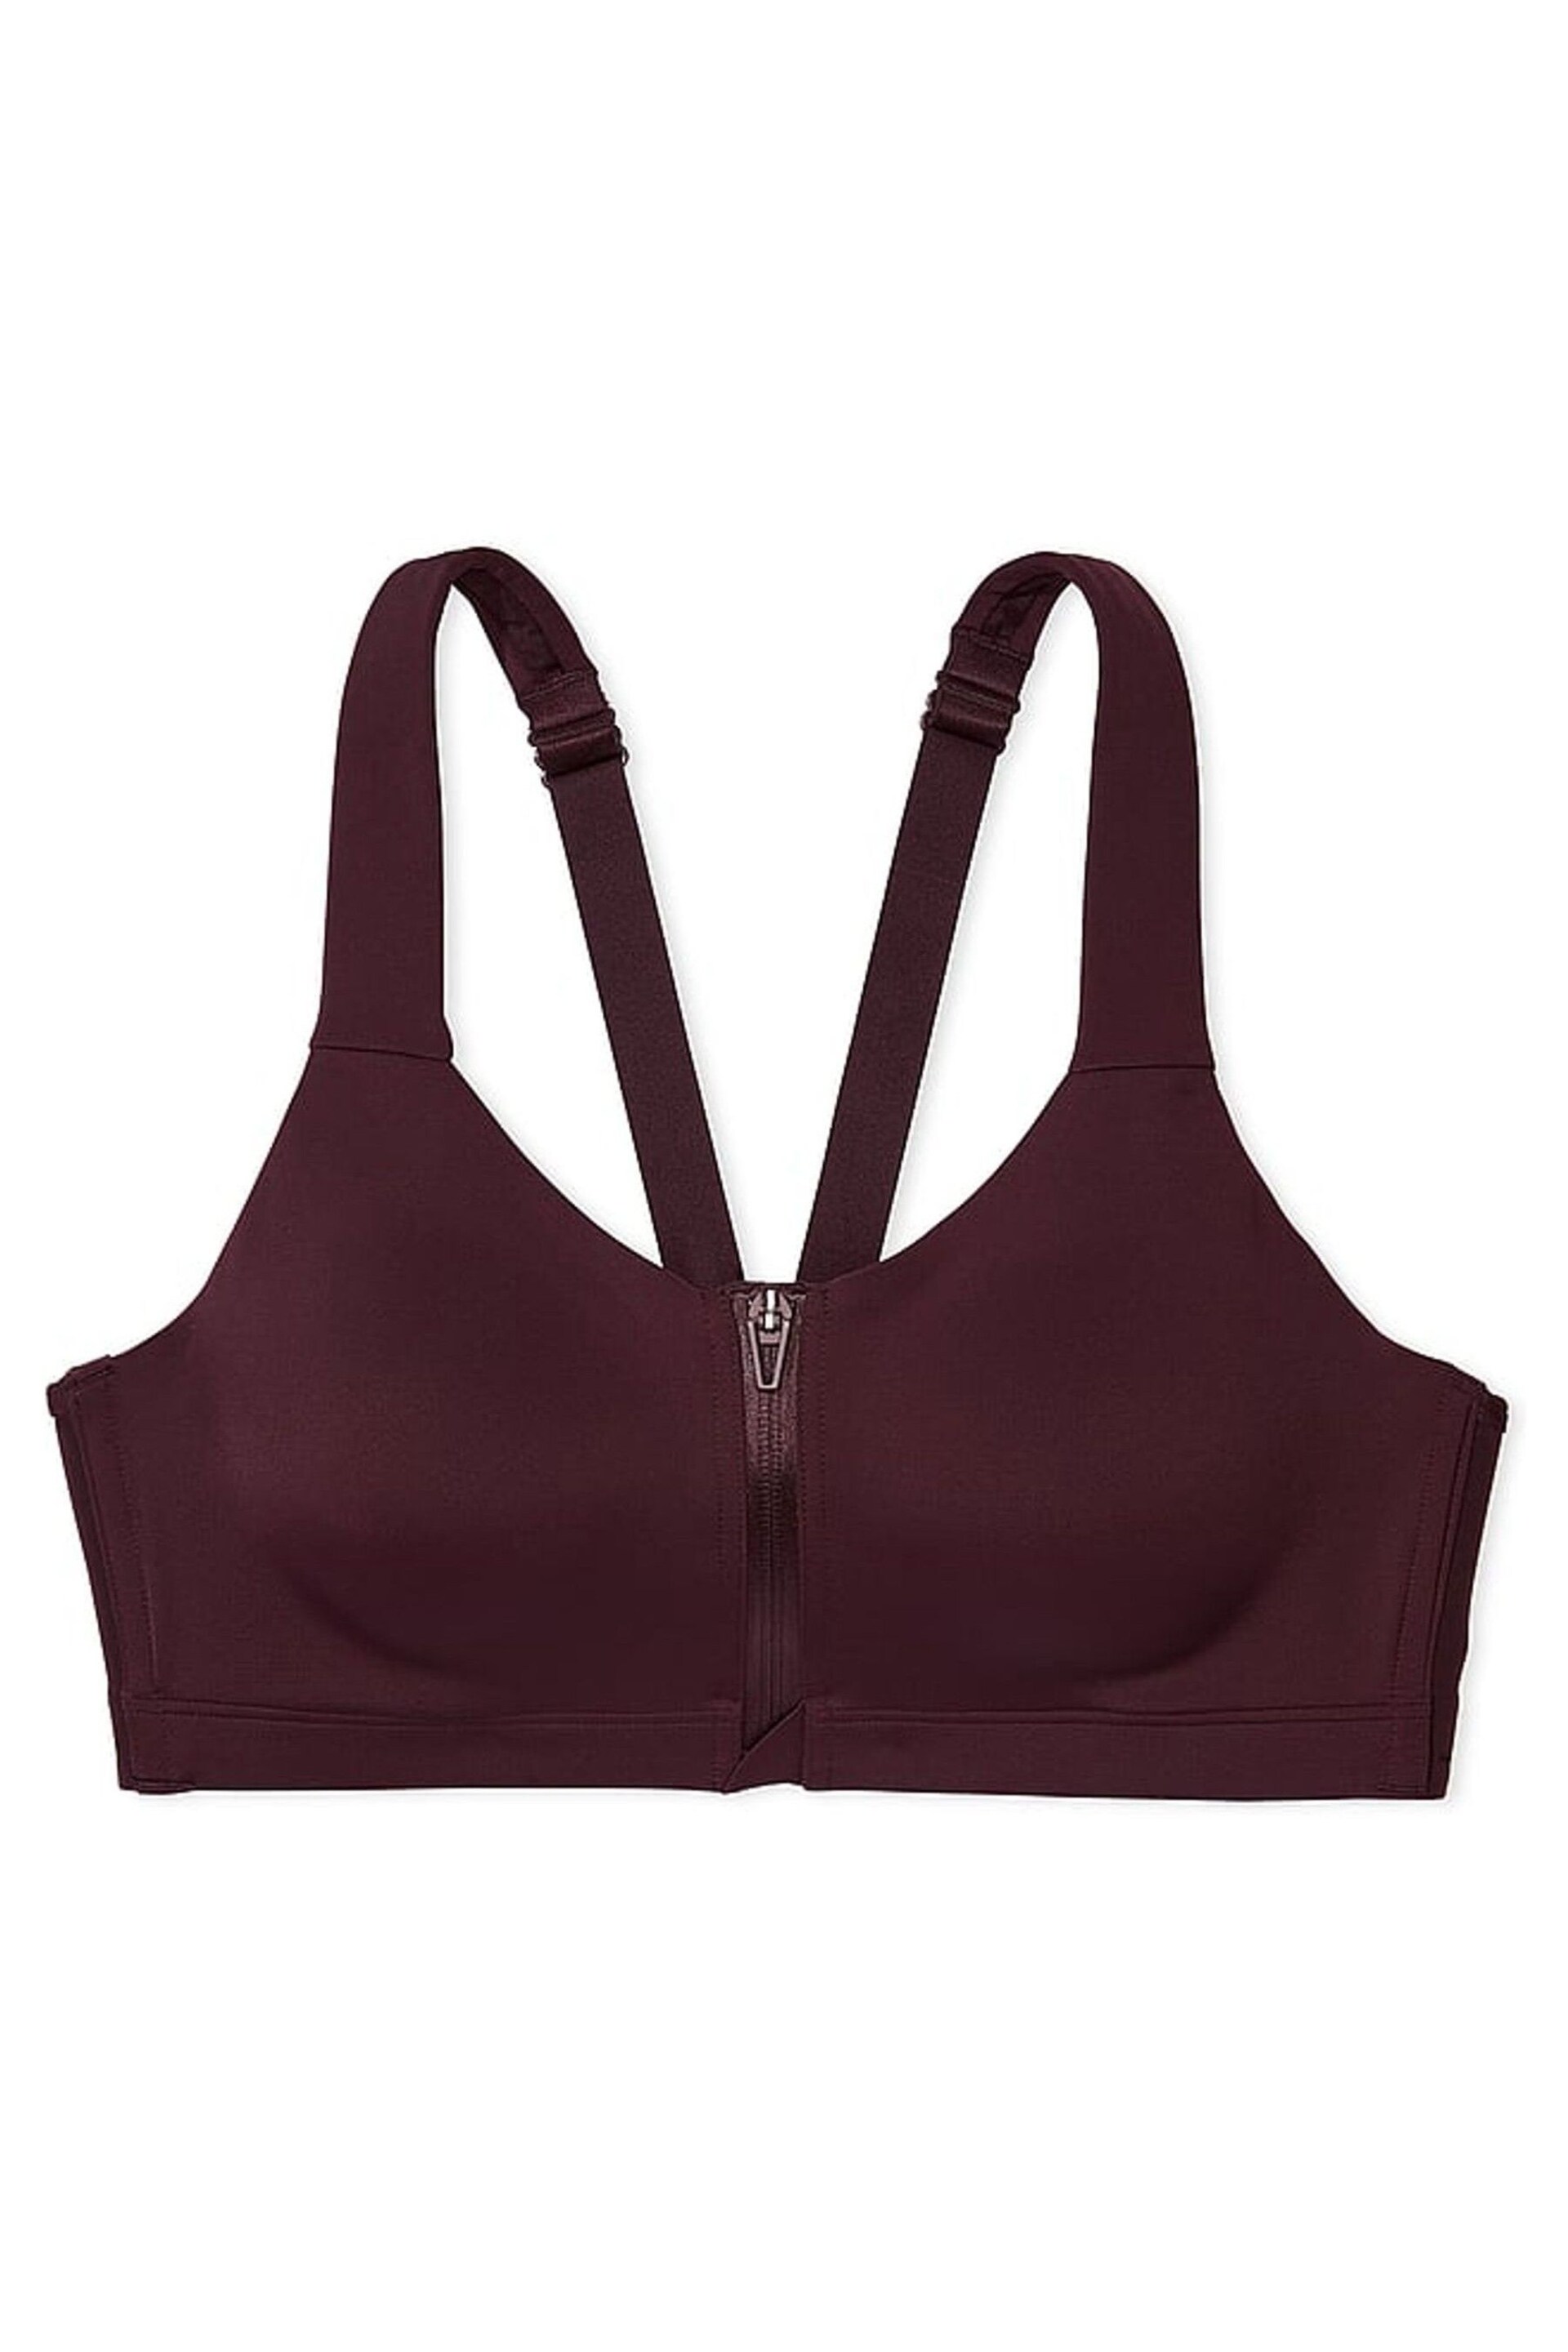 Victoria's Secret Winter Wine Purple Smooth Front Fastening Wired High Impact Sports Bra - Image 4 of 4